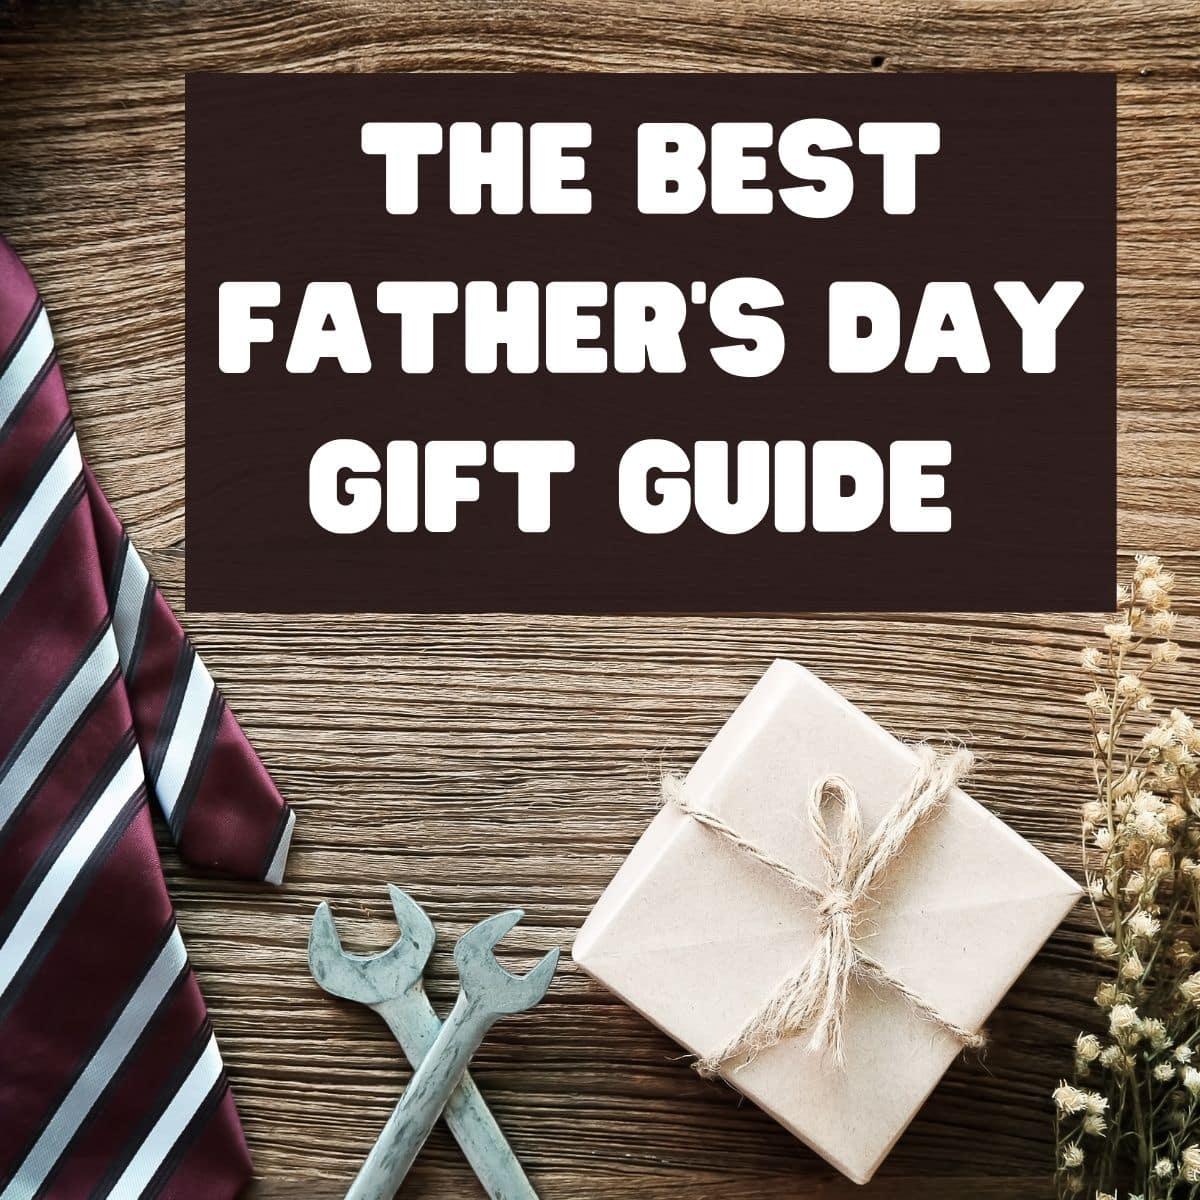 https://www.getyourholidayon.com/wp-content/uploads/2022/06/the-best-fathers-day-gift-guide.jpg